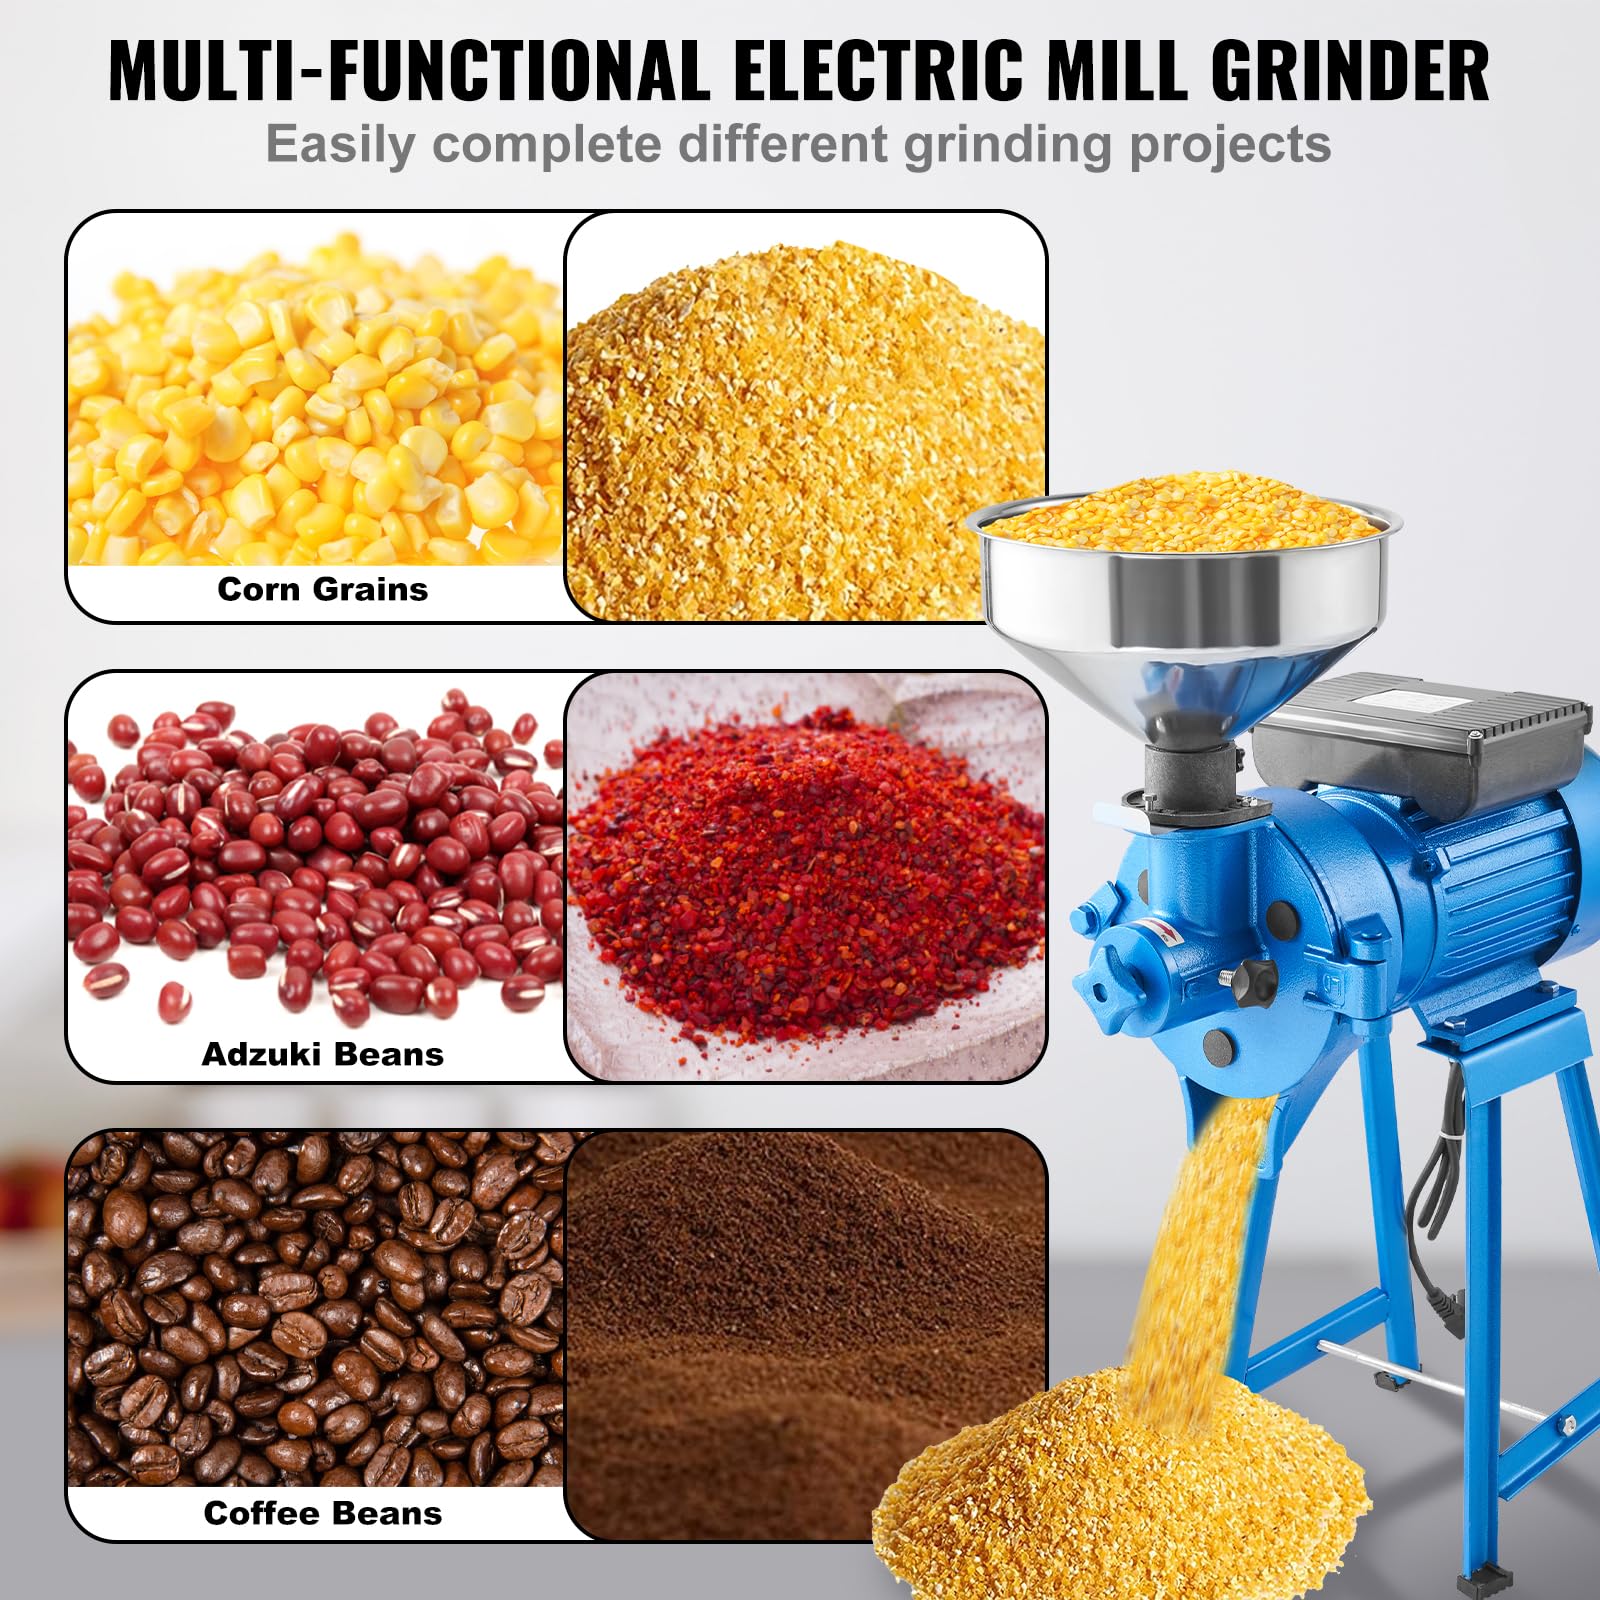 VEVOR Electric Grain Mill Grinder, 1500W 110V Dry & Wet Spice Grinder, Commercial Corn Mill with Funnel, Thickness Adjustable Powder Machine, Heavy Duty Feed Flour Cereal Mill Wheat Grinders